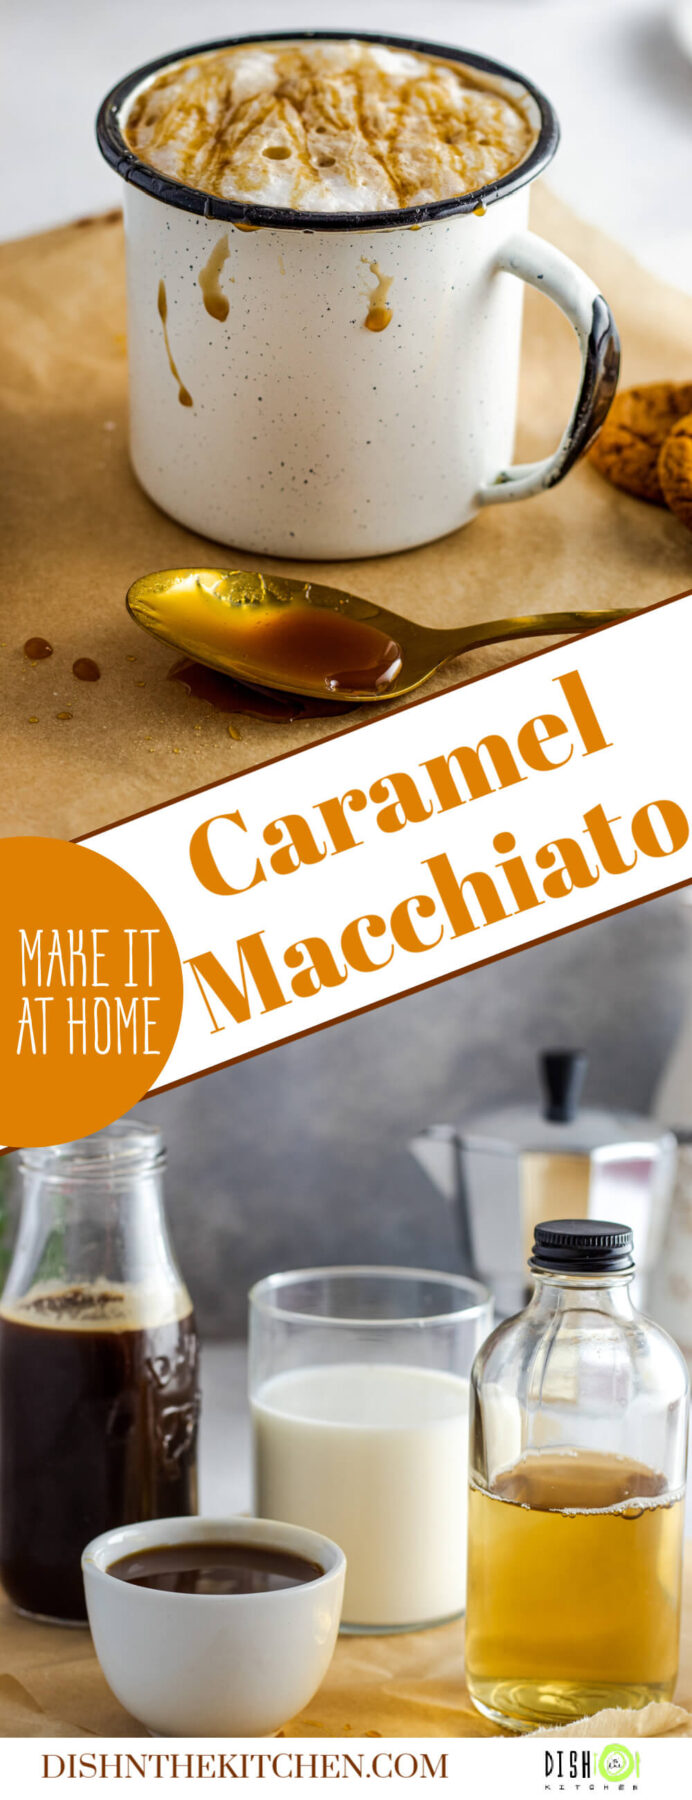 Pinterest image featuring the ingredients needed to make a caramel macchiato and a white mug filled with foamy Caramel Macchiato garnished with a golden caramel drizzle.